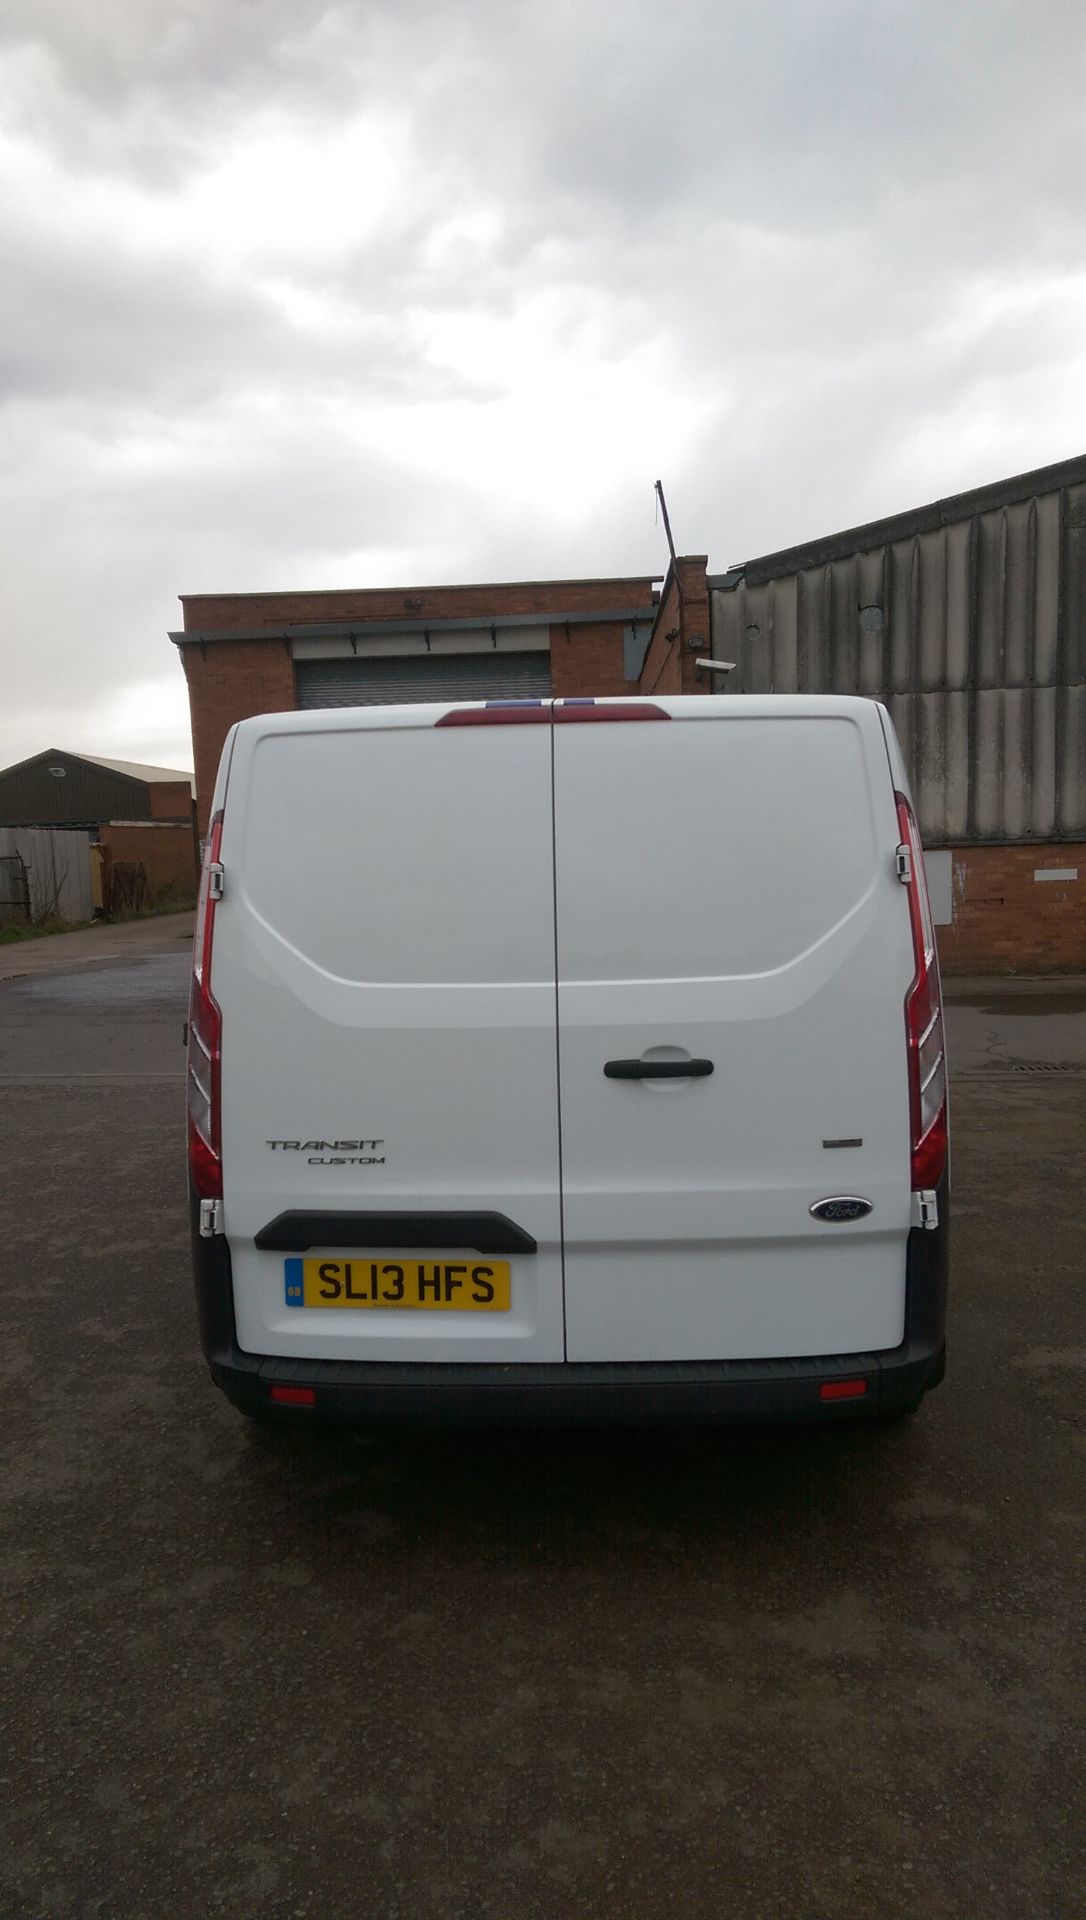 Ford Transit 100PS T270 FDW SL13 HFS 52k miles - Image 2 of 5